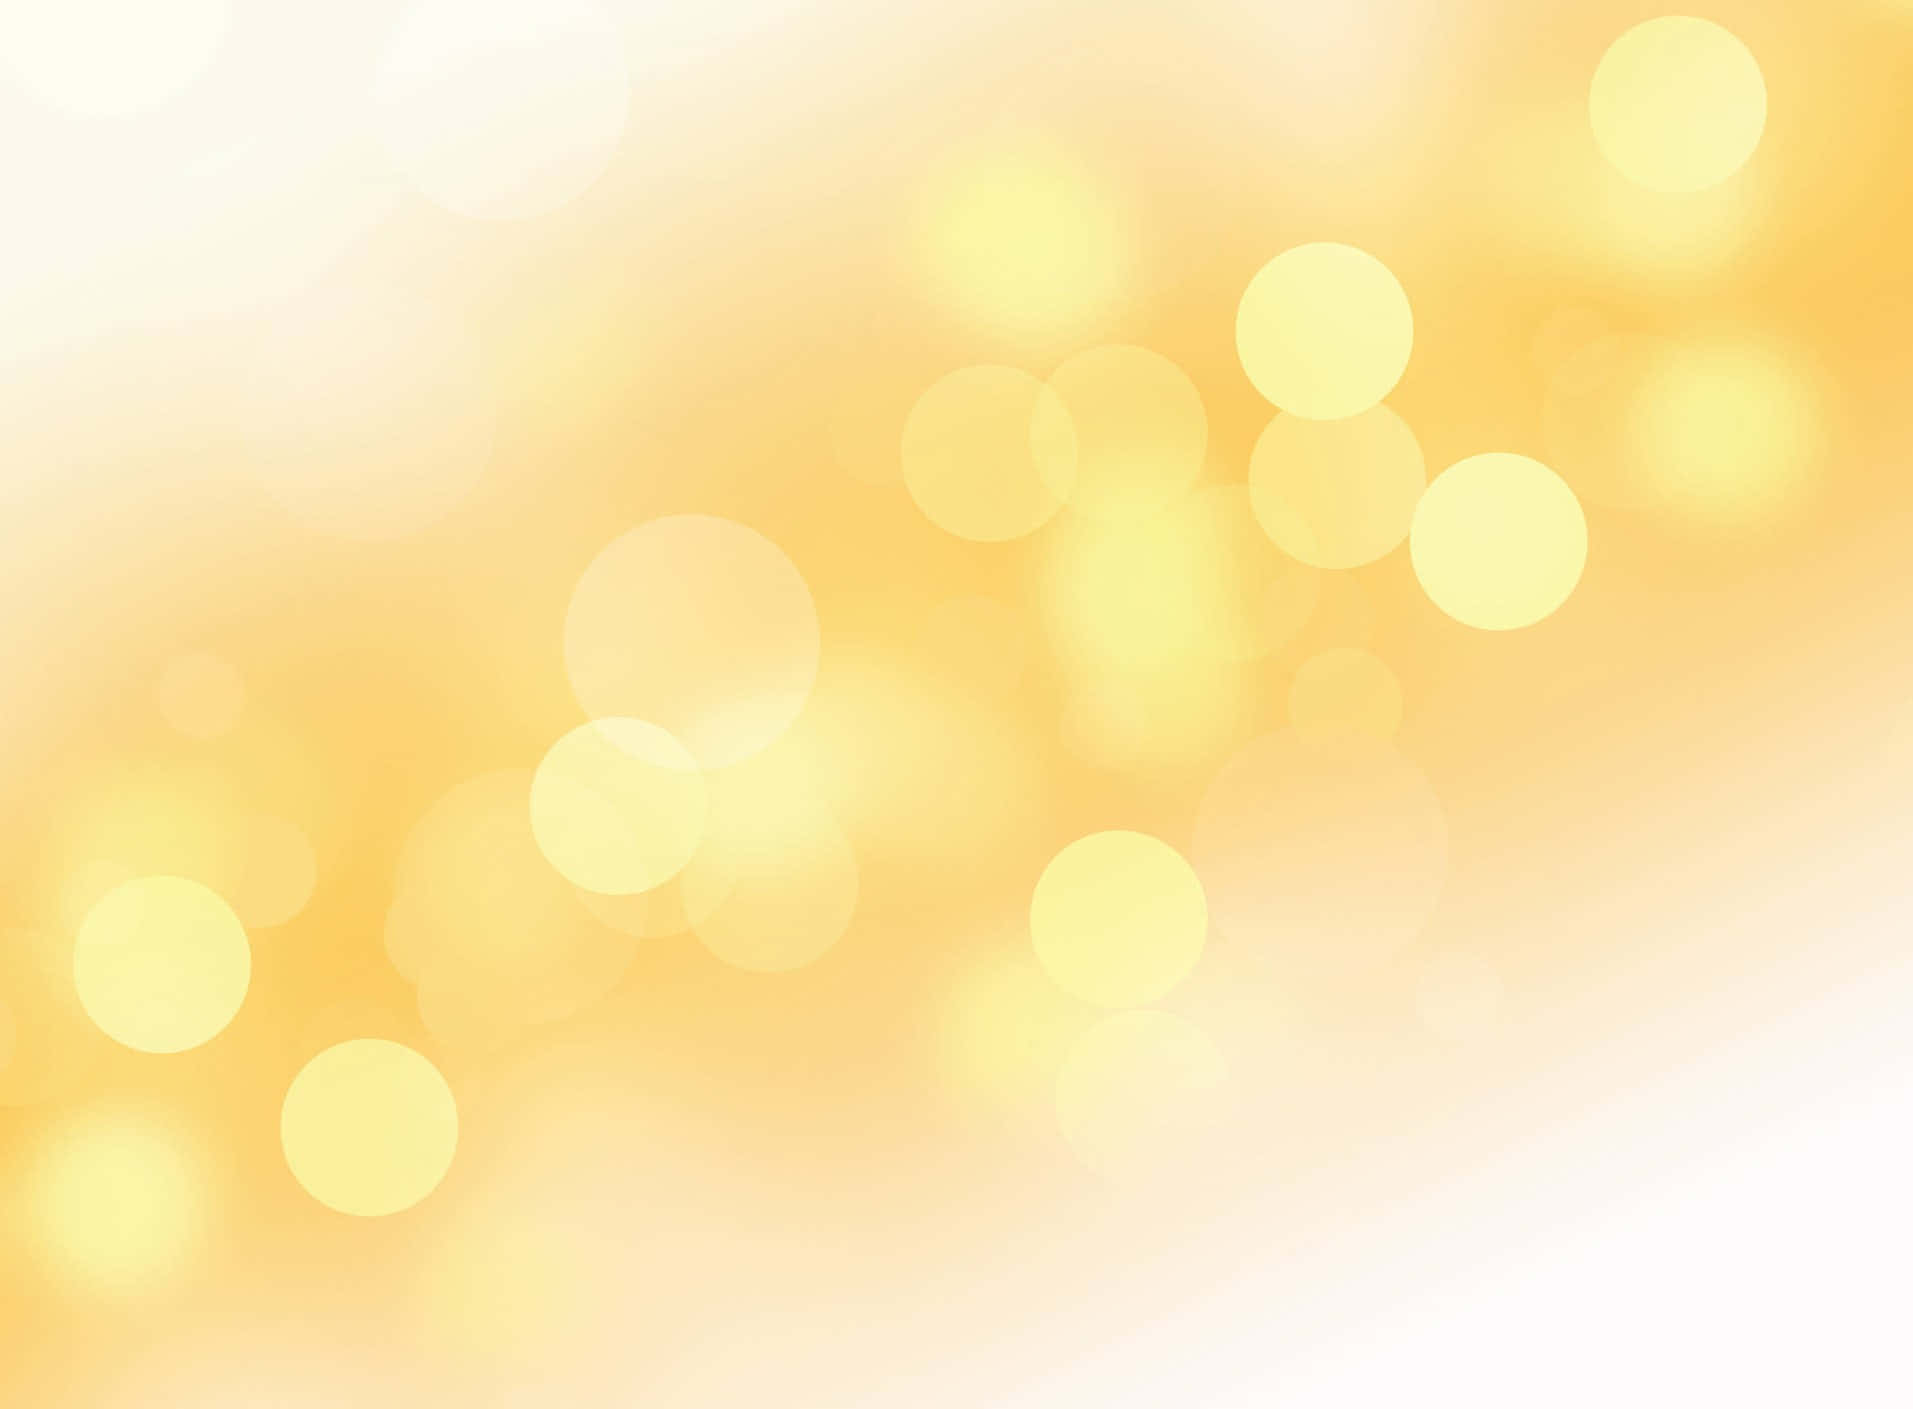 Plain Yellow Background - Keep things bright and simple